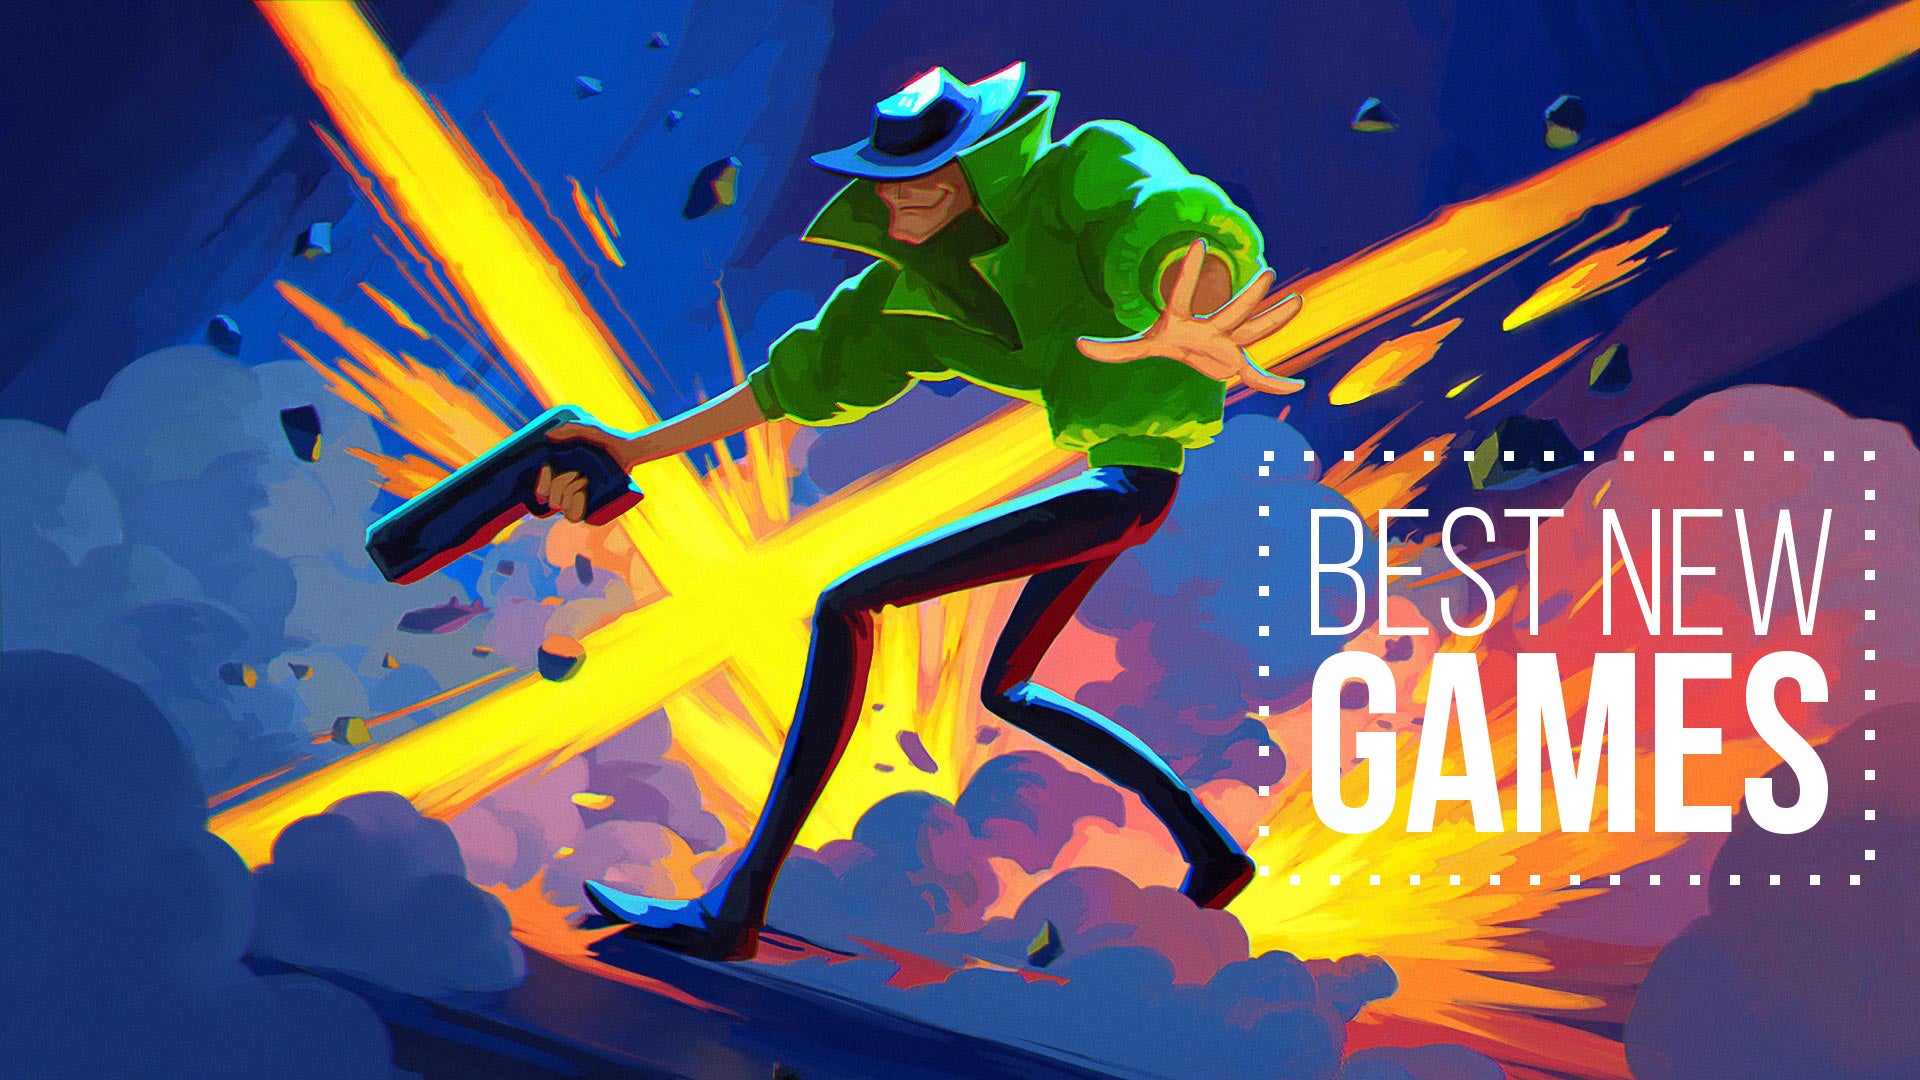 Best new Android and iPhone games of the month - September edition